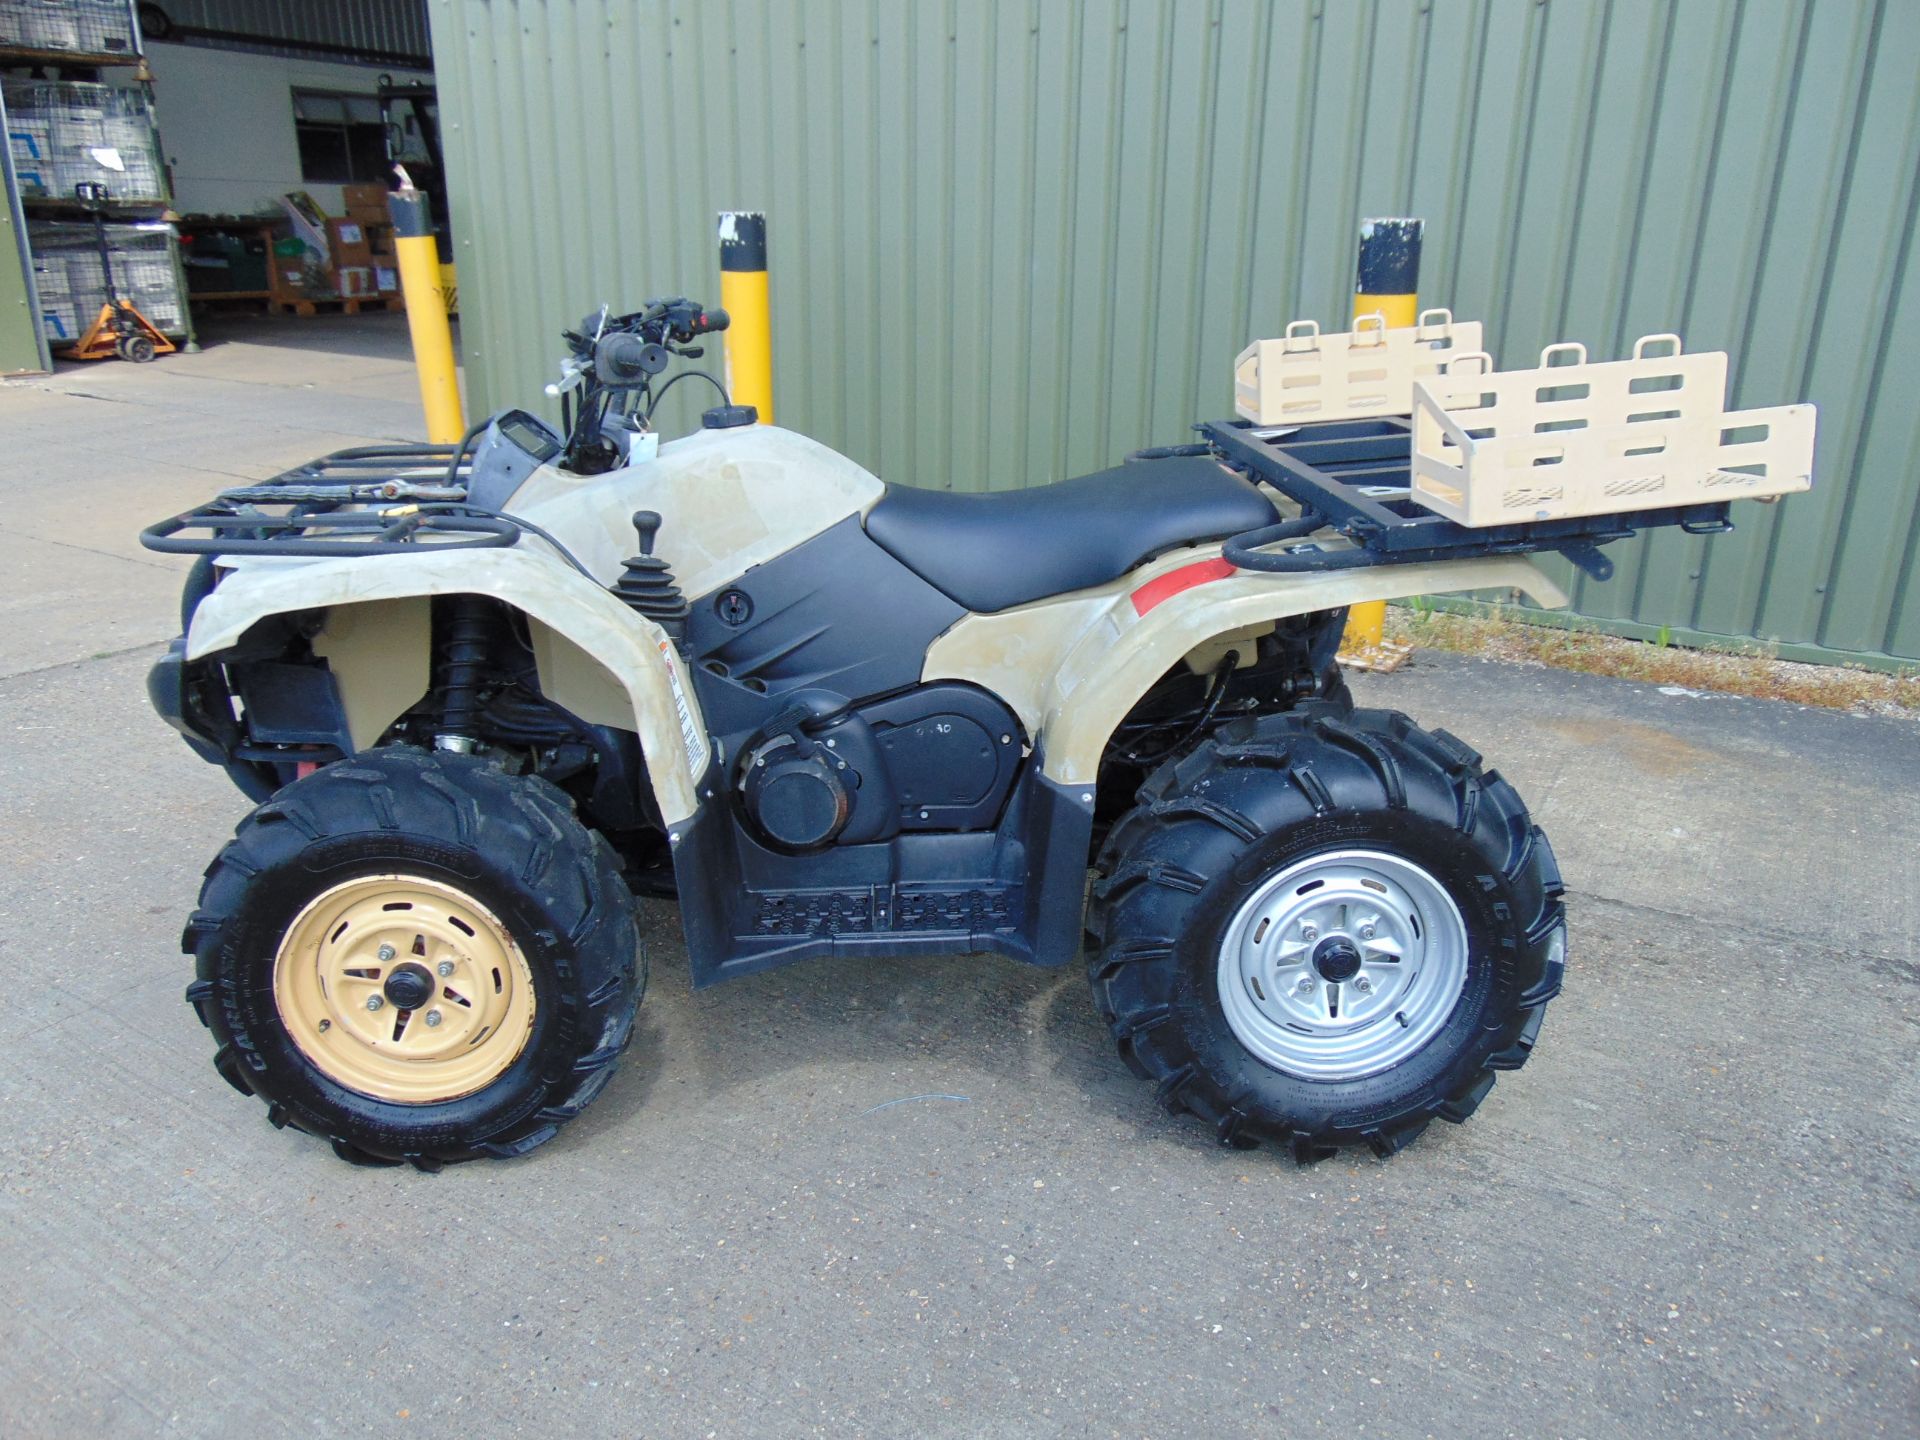 Military Specification Yamaha Grizzly 450 4 x 4 ATV Quad Bike Showing 223 hrs - Image 7 of 23